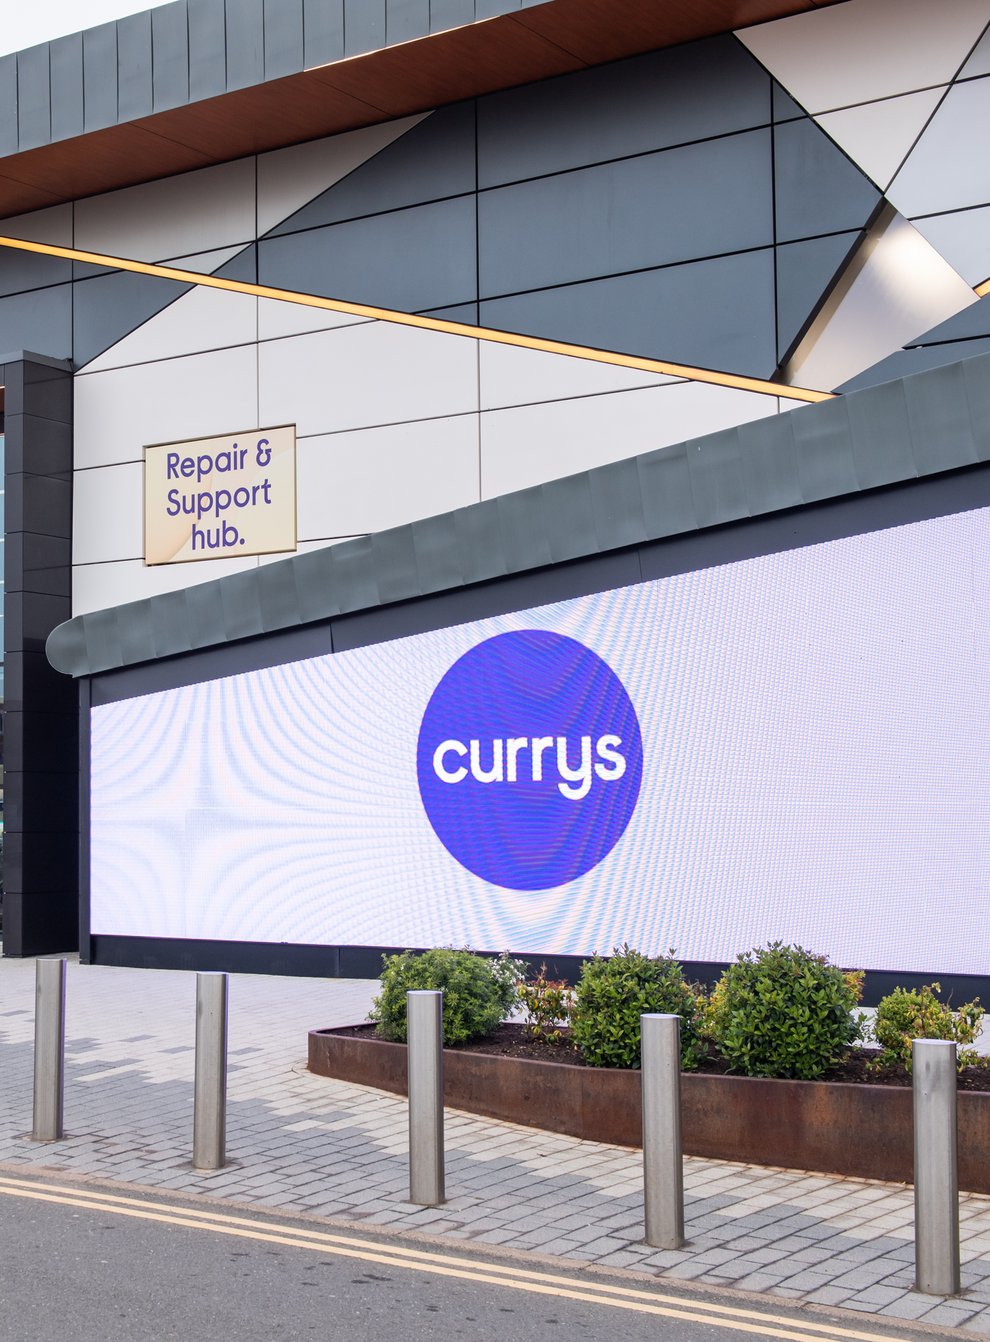 Currys will hand back £75m to shareholders in a share buyback programme (Currys/PA)